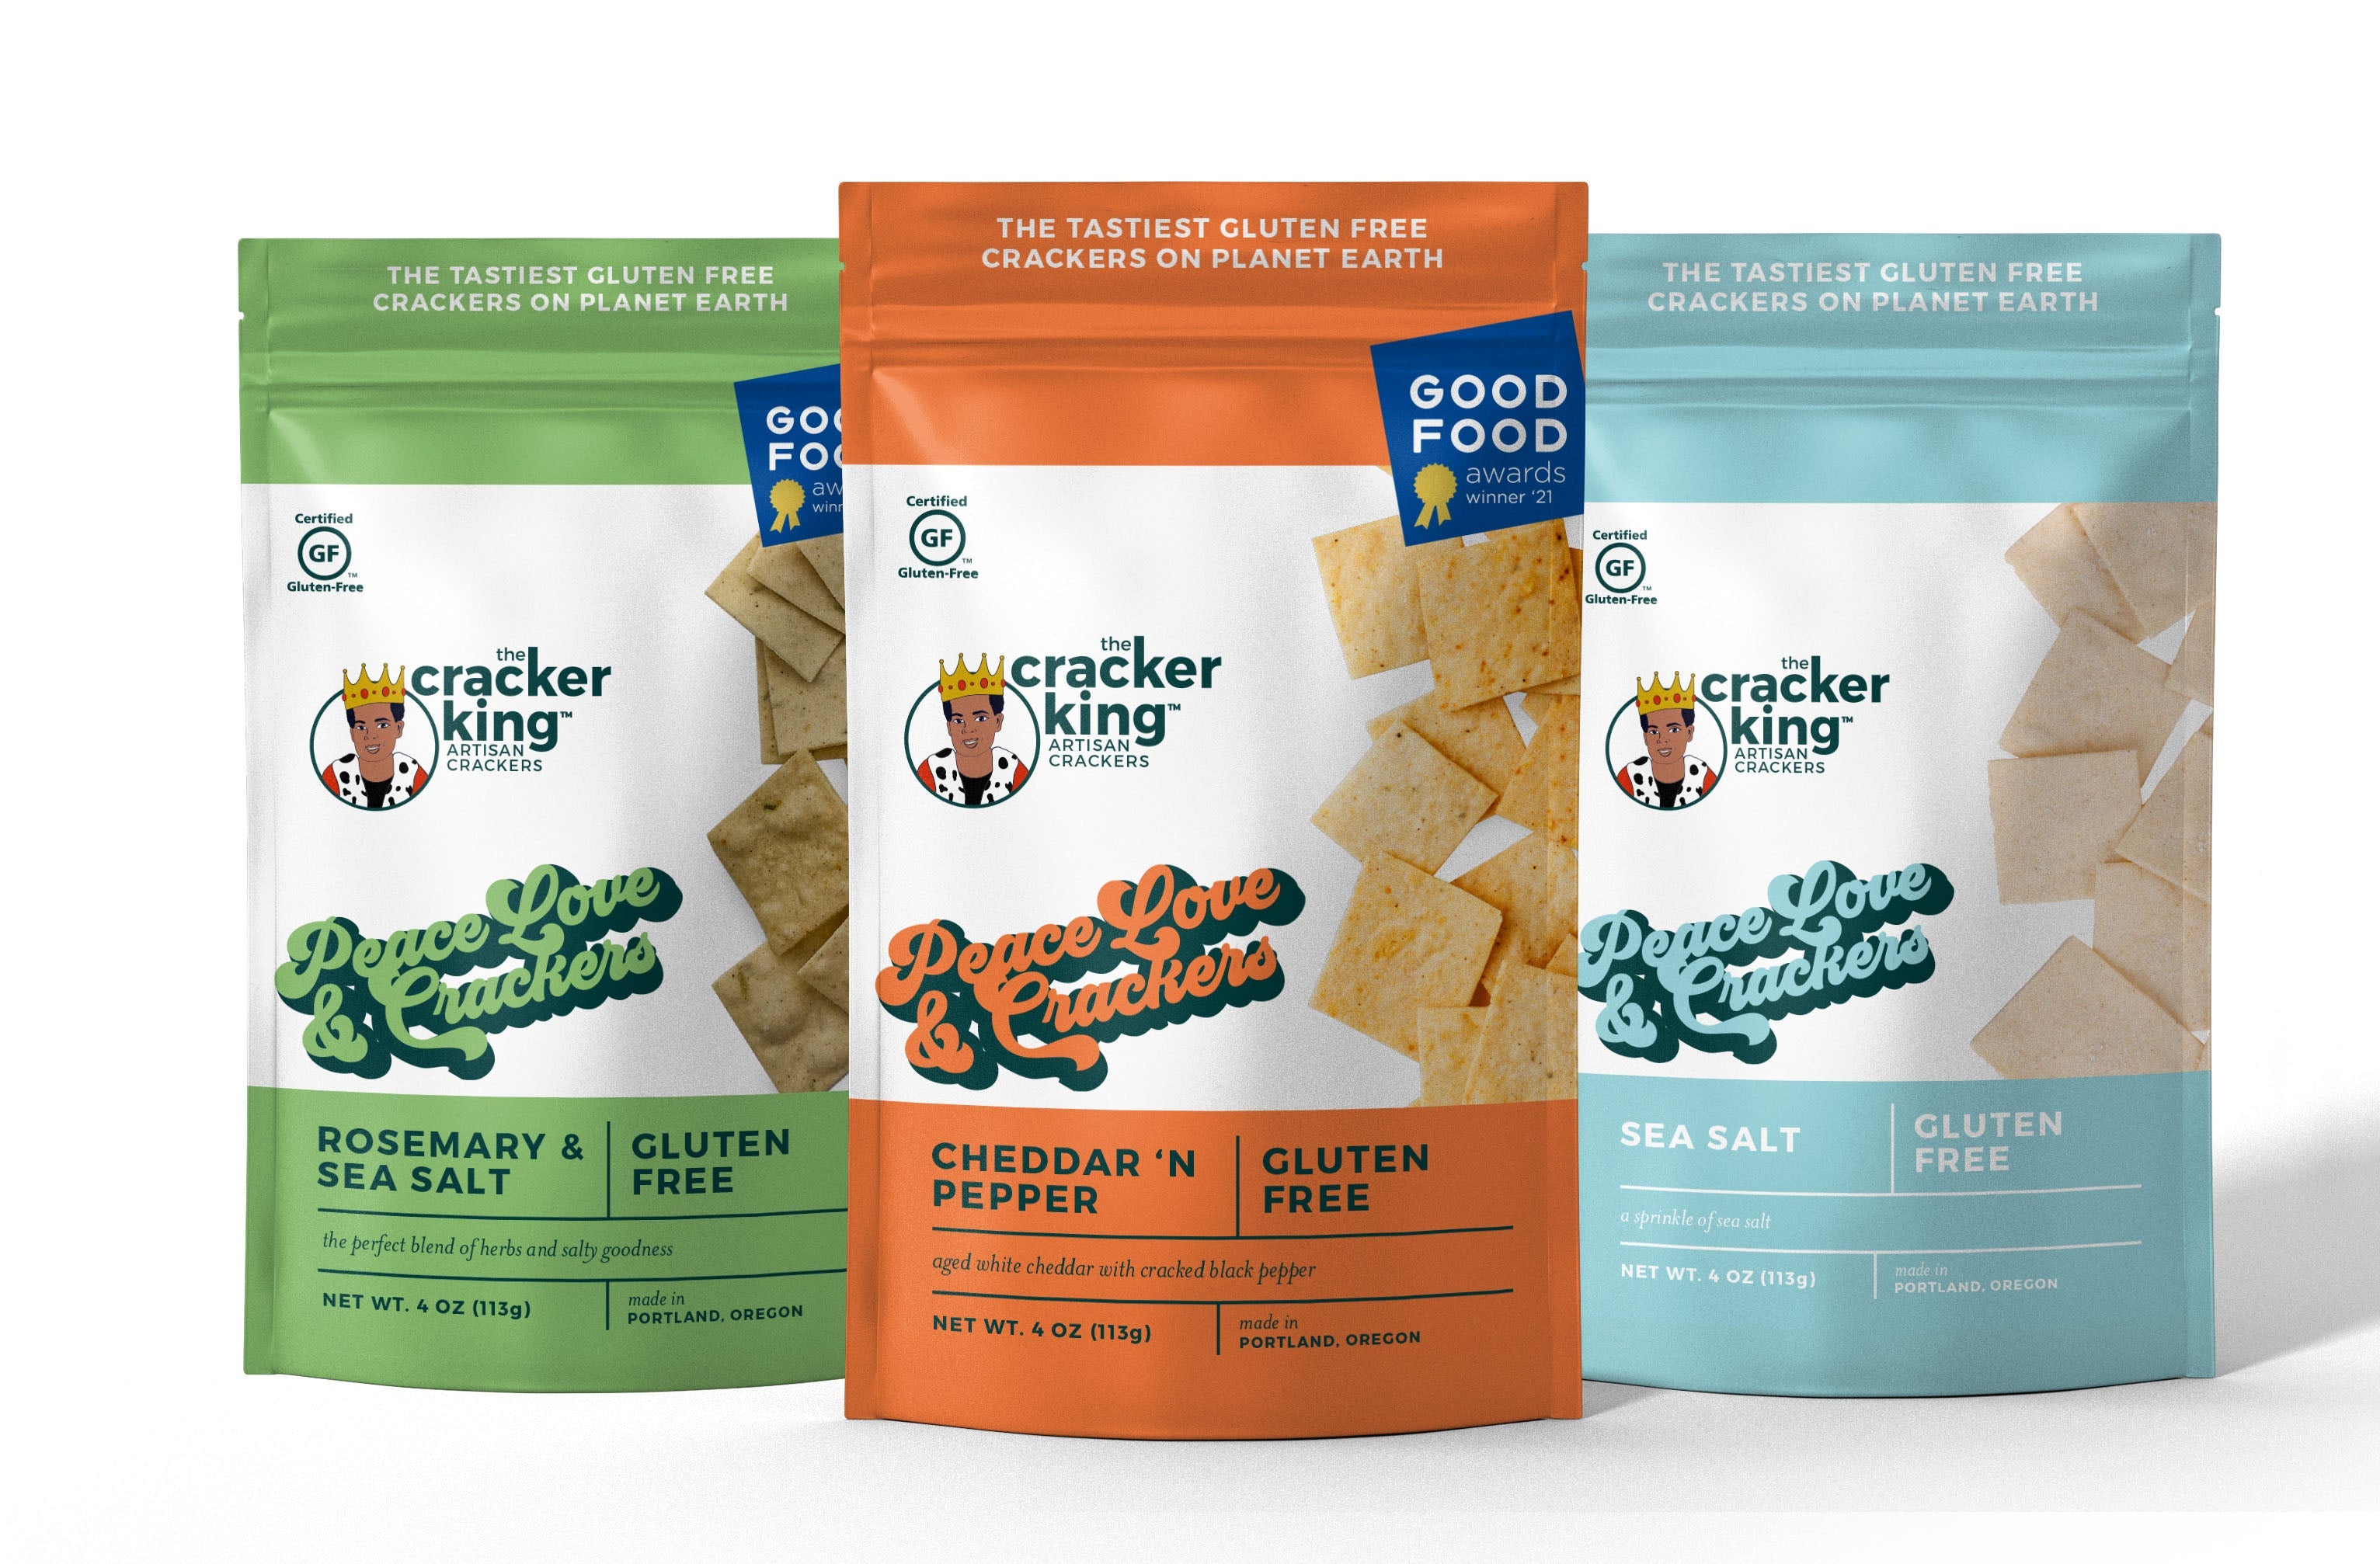 Family Pack (3 bags, 1 of each flavor)